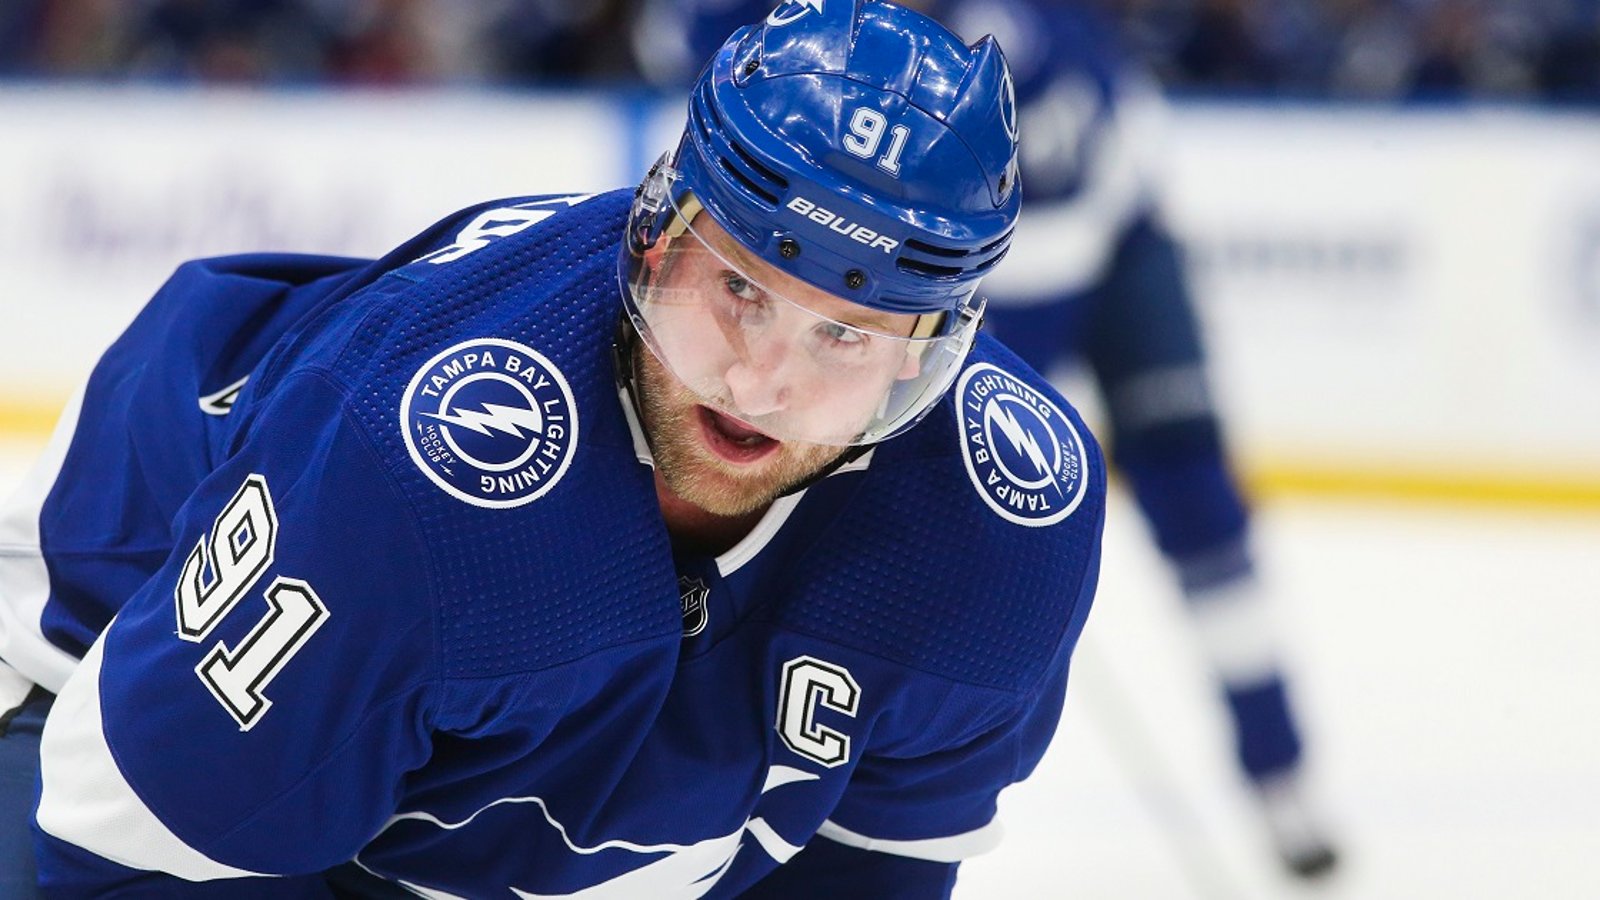 Radio host threatens to “obliterate” the Tampa Bay Lightning.